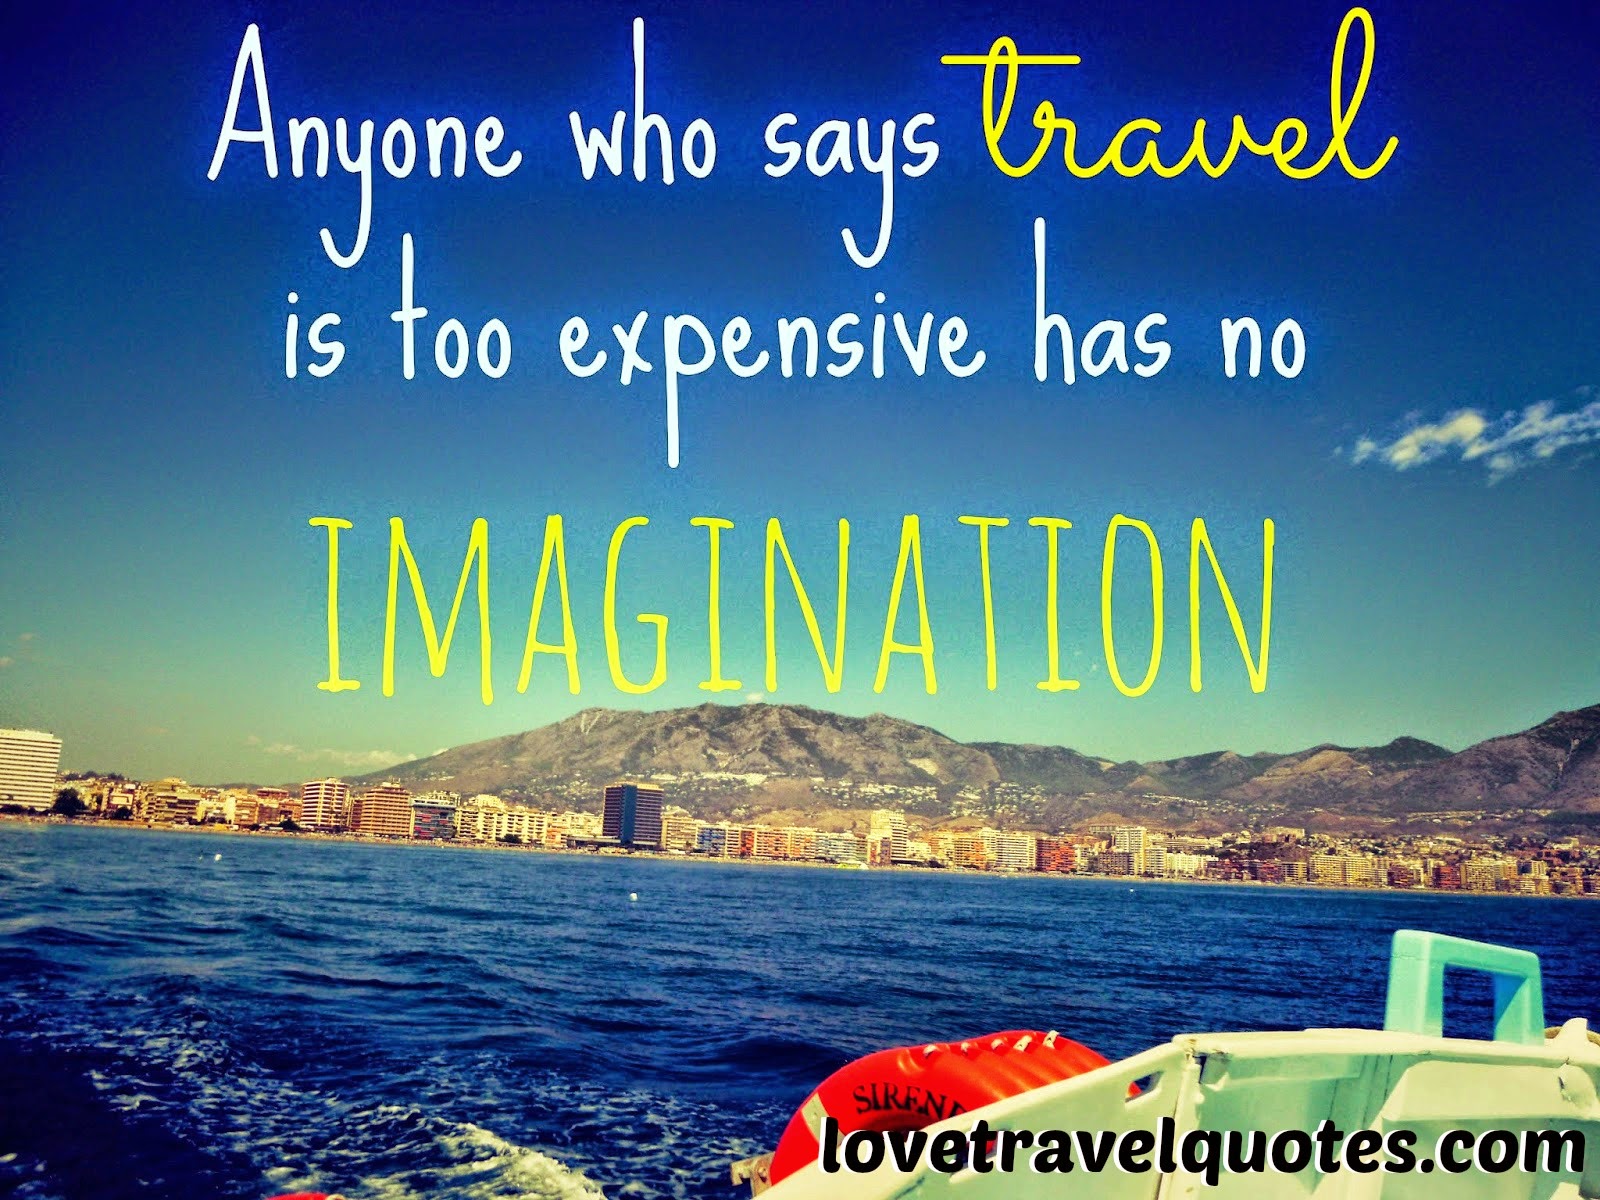 Anyone who says Travel is too expensive has no imagination